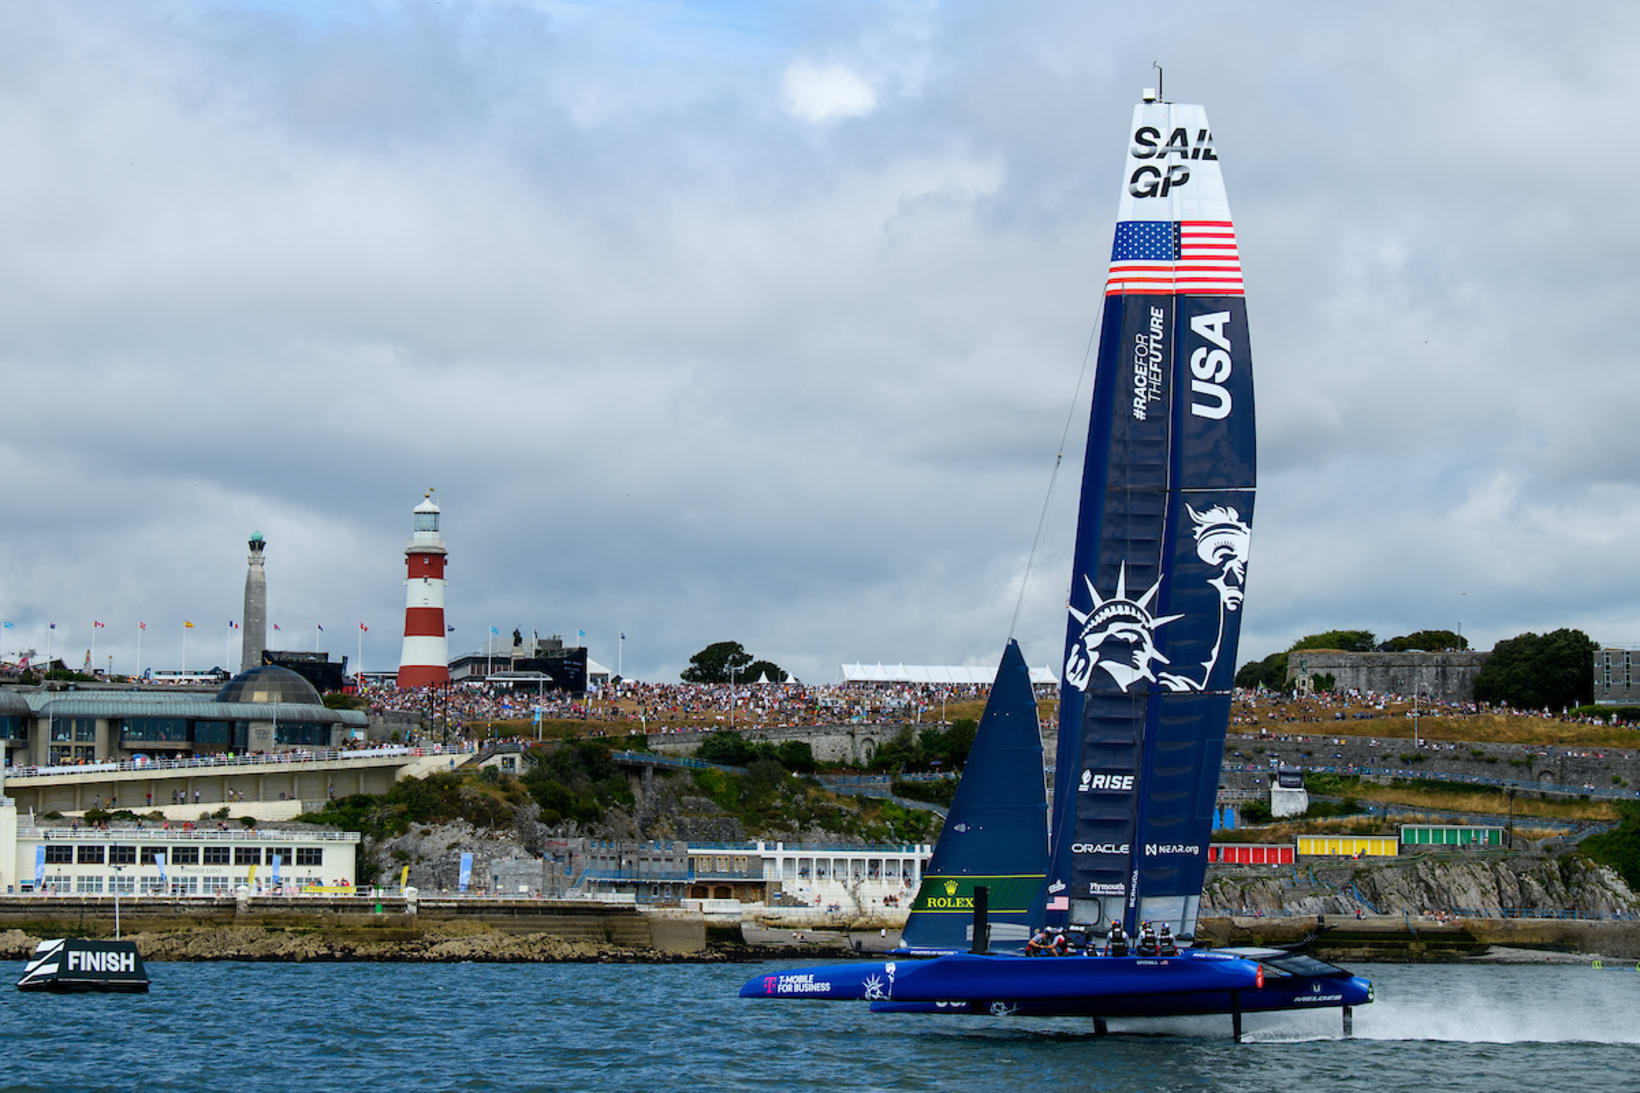 USA SailGP Team helmed by Jimmy Spithill in action on Race Day 1 of the Great Britain Sail Grand Prix in Plymouth, England on July 30, 2022.